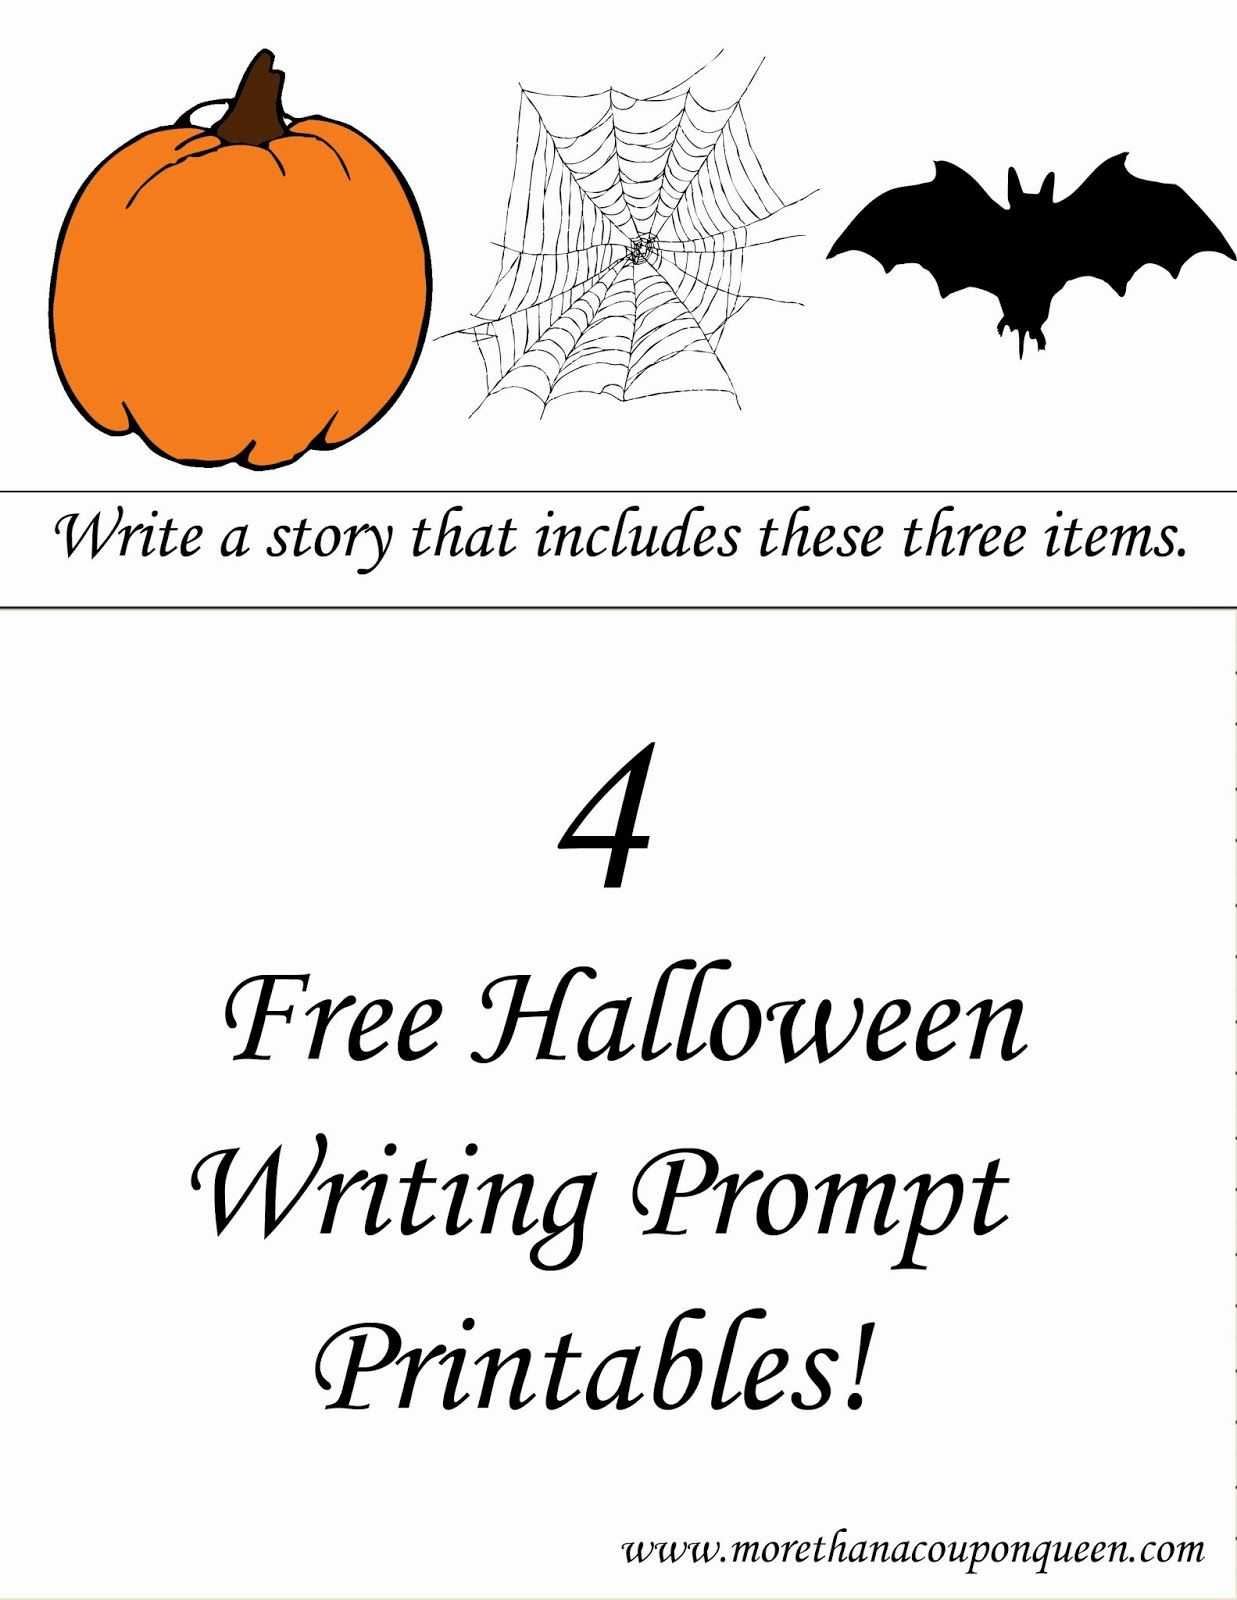 History Of Halloween Worksheet Answers as Well as 4 Free Halloween Writing Prompt Printables